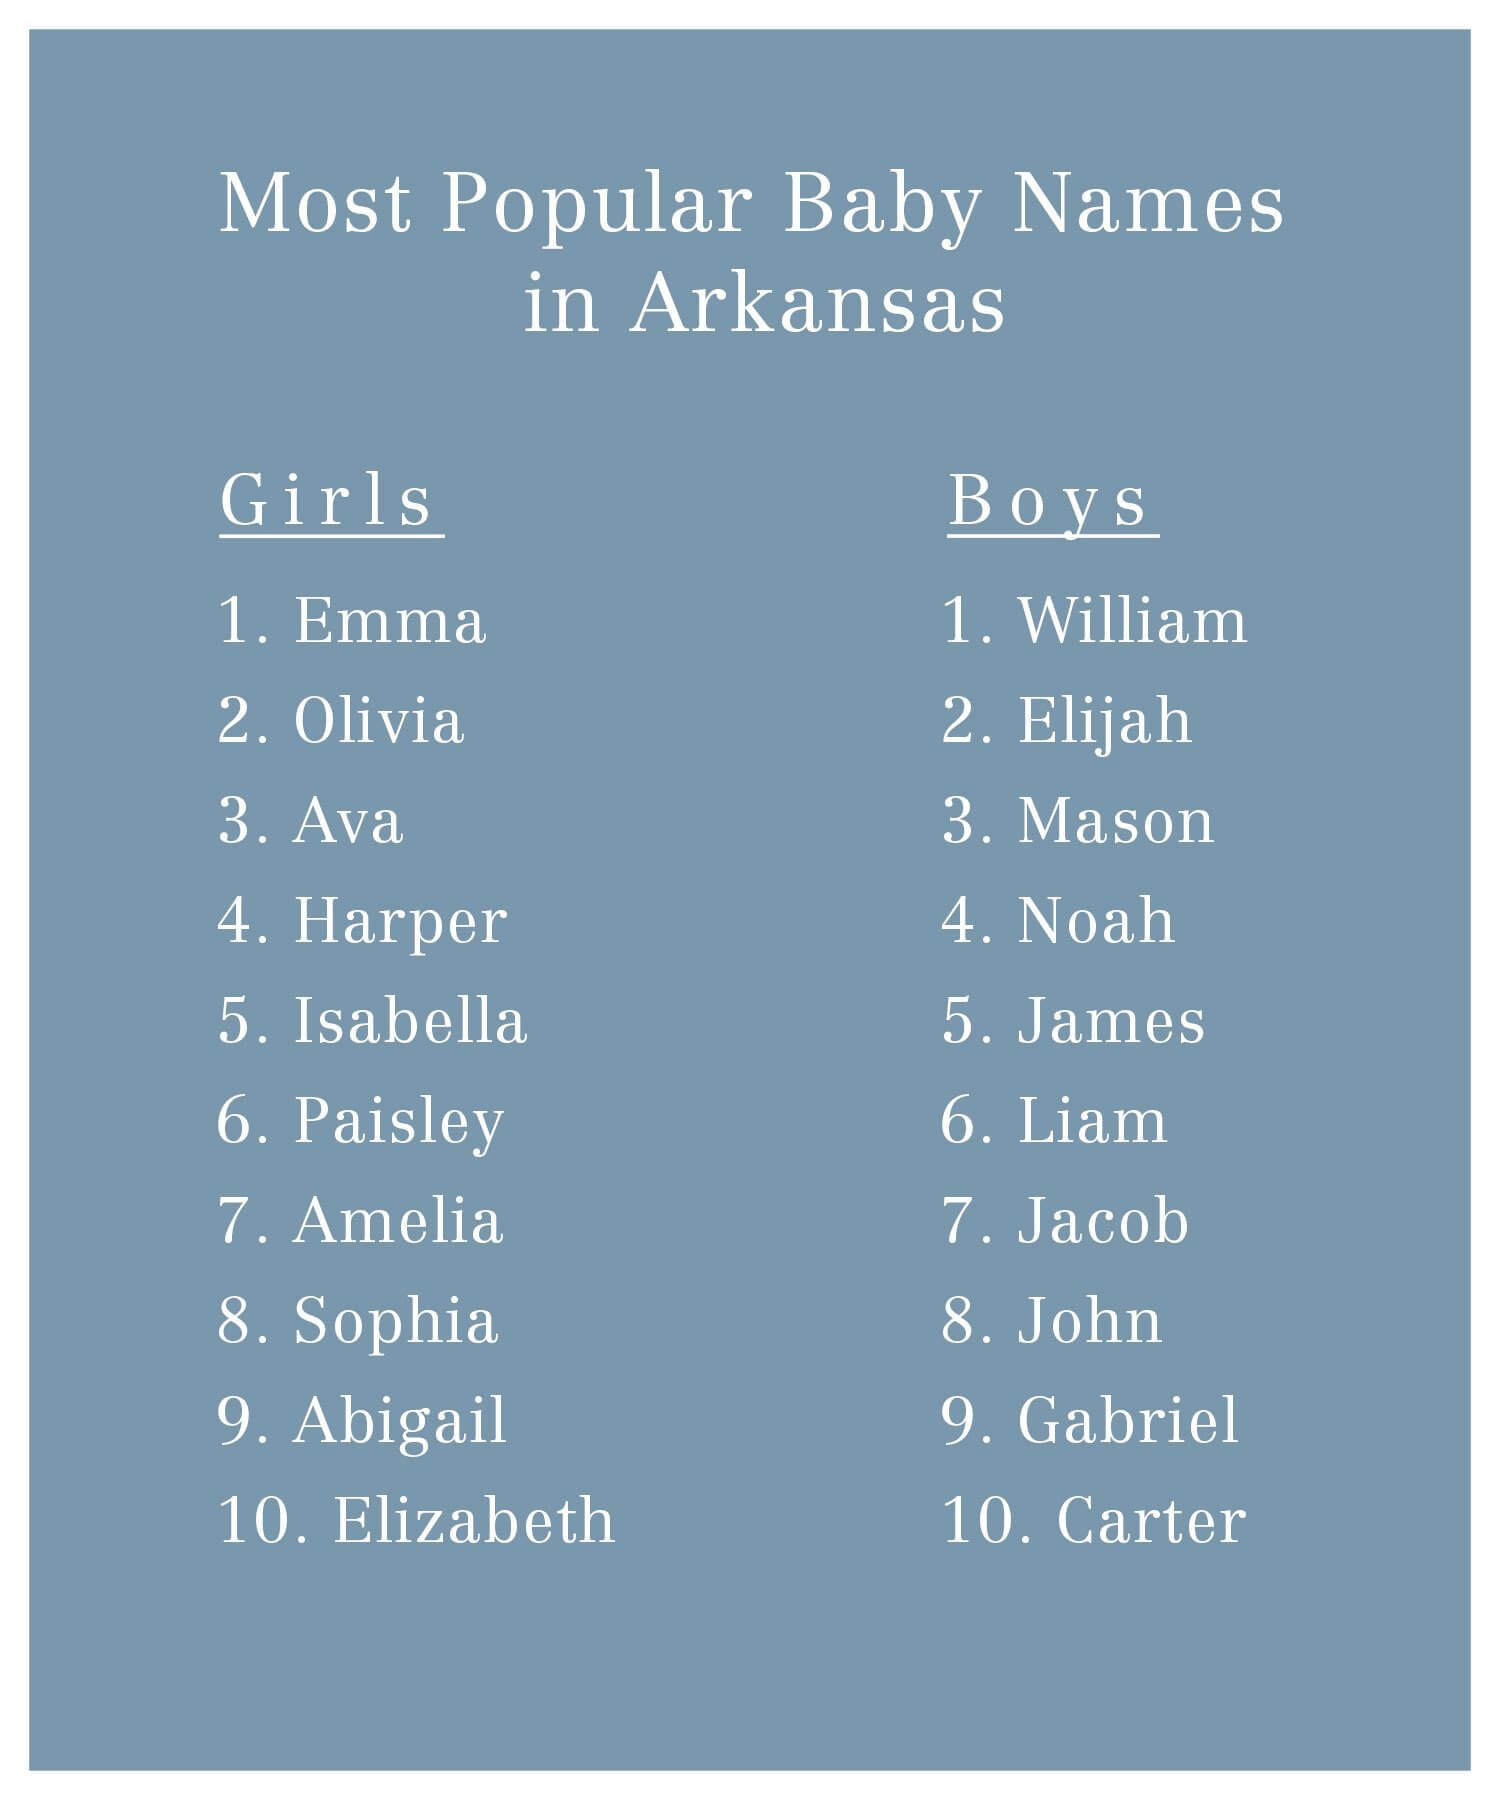 Top 10 Most Popular Baby Names in the South by State